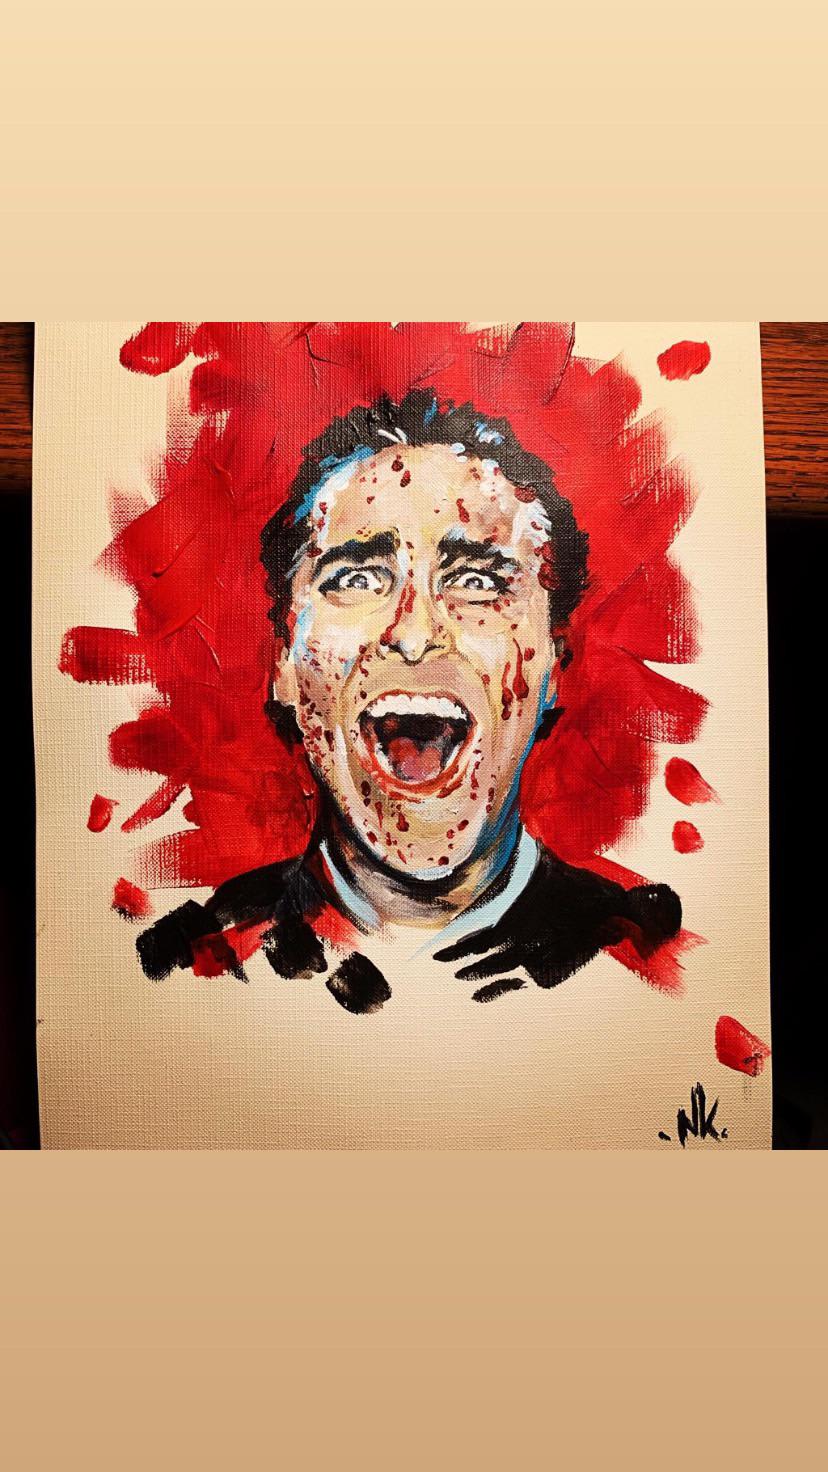 Trying canvas paper! American Psycho portrait